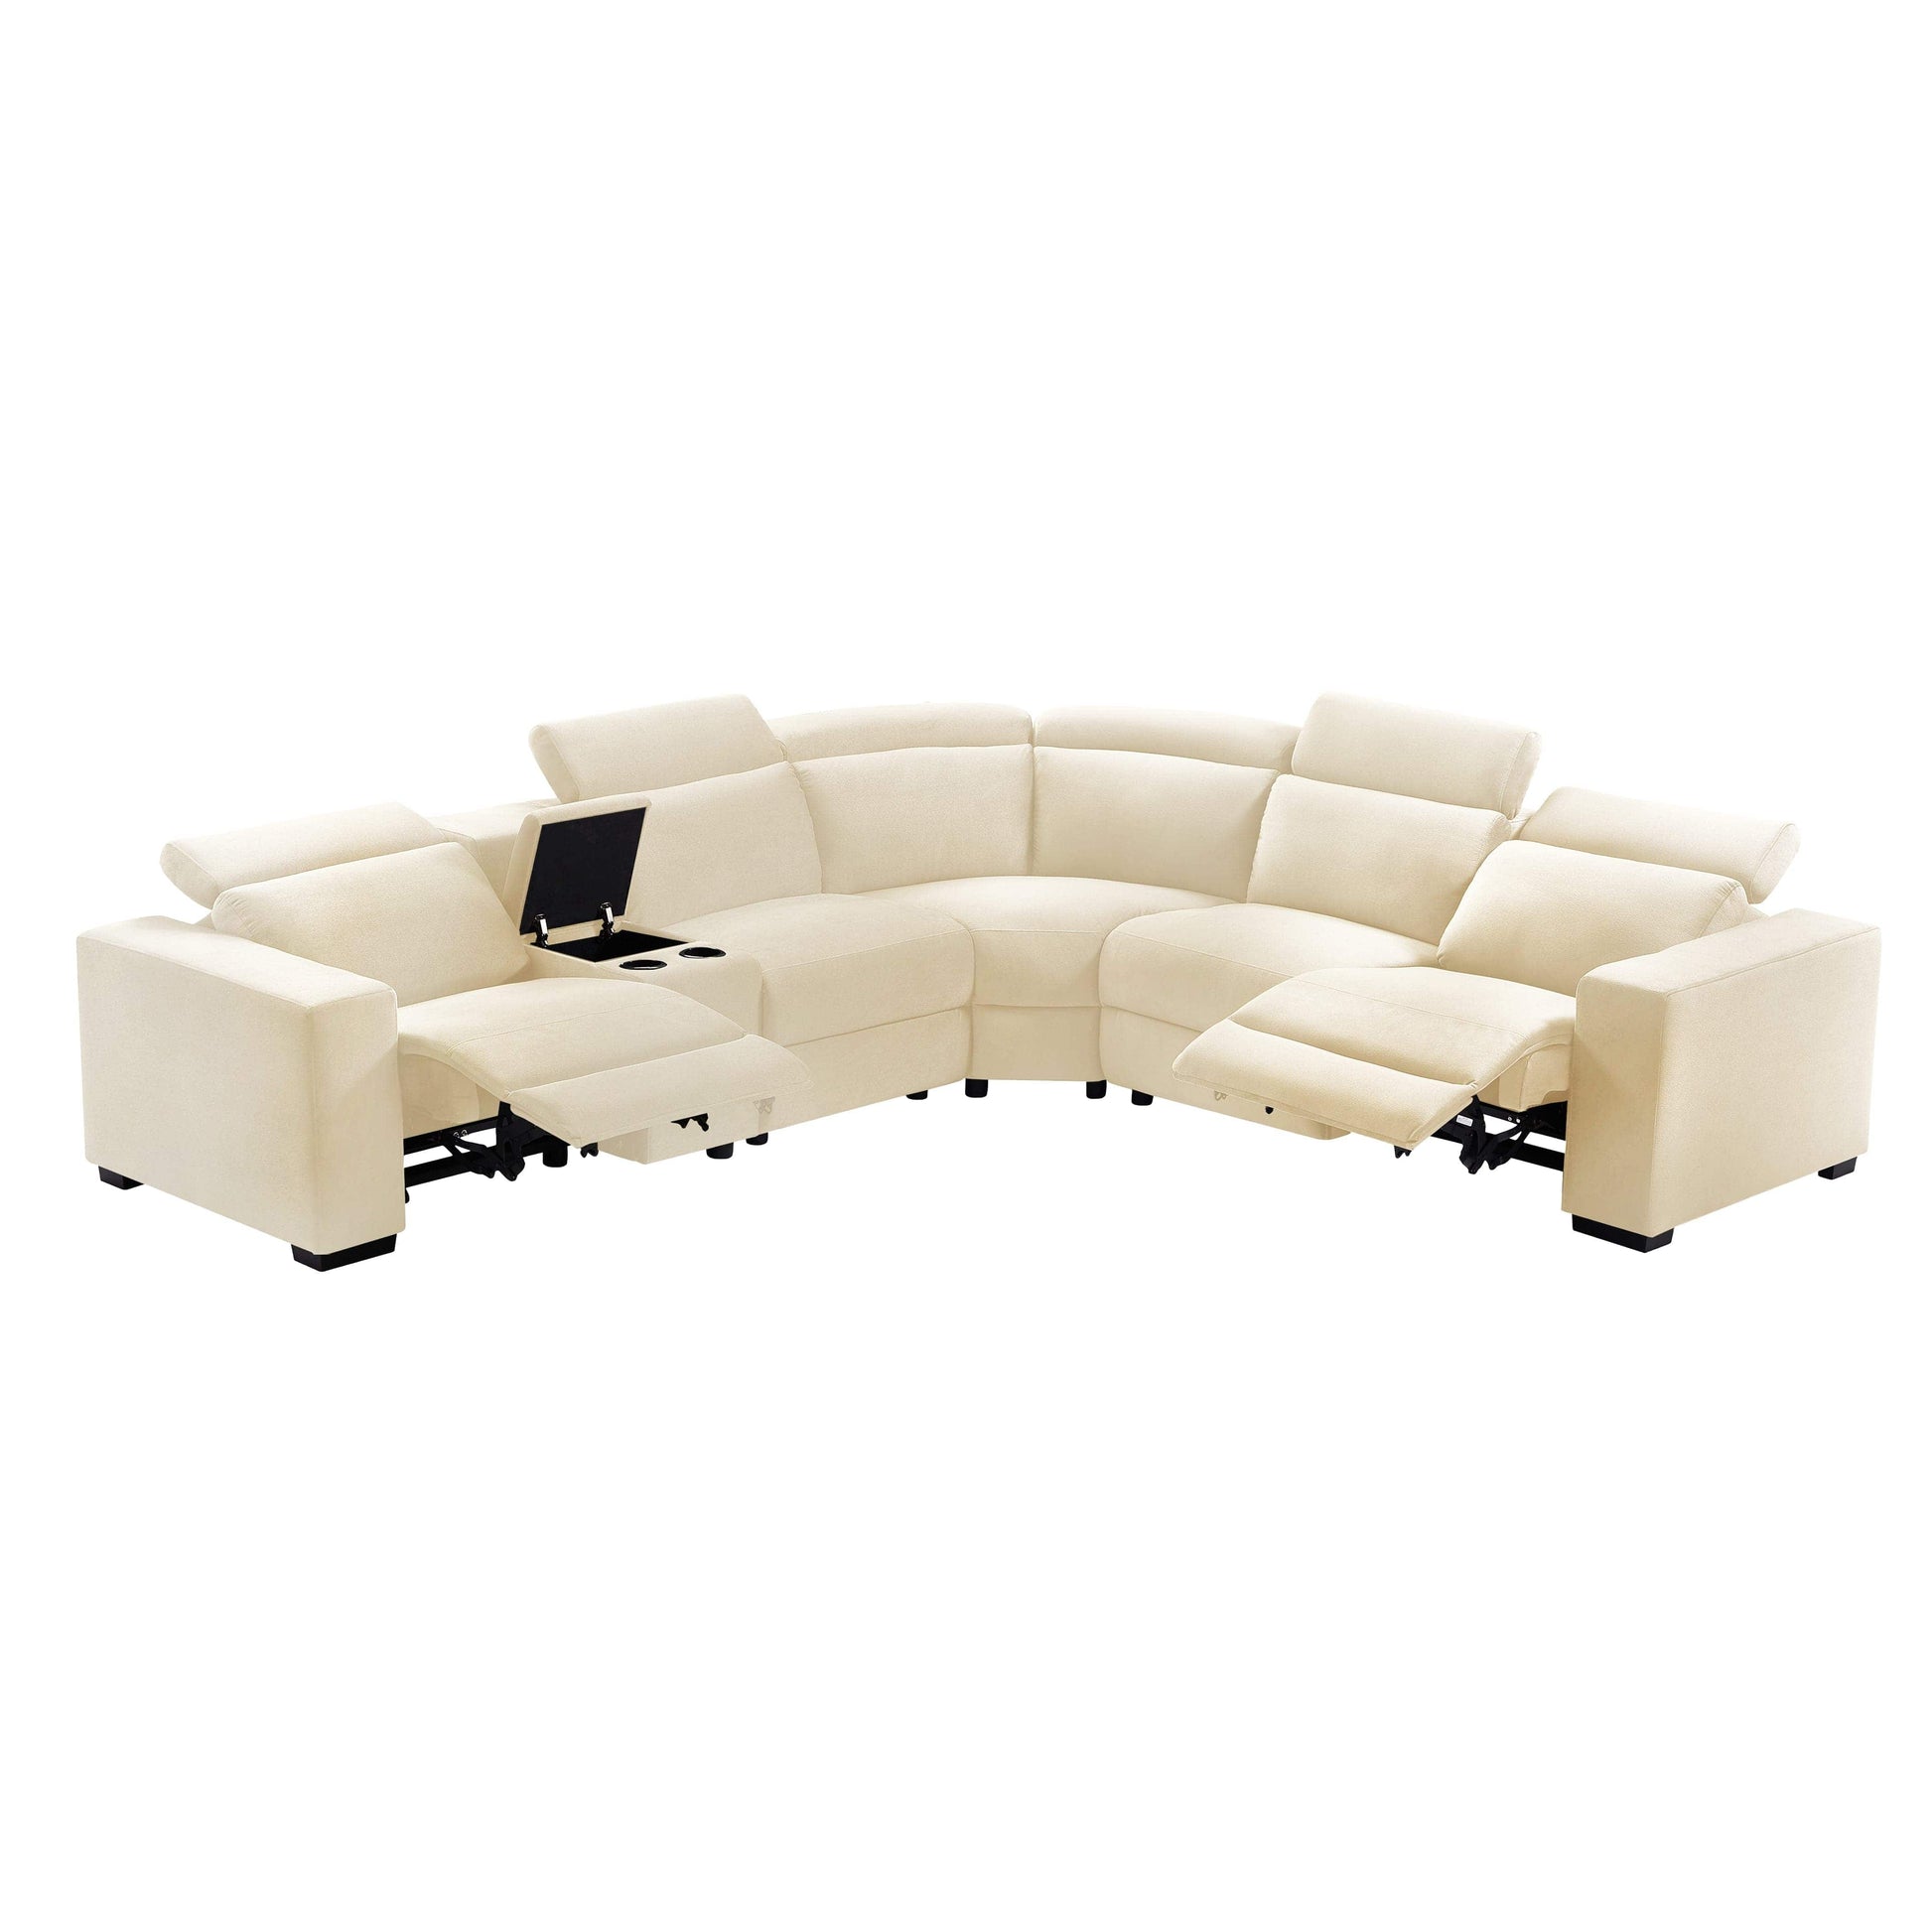 TFC&H Co. Electric Recliner Sectional Living Room Set - Beige- Ships from The US - sectional at TFC&H Co.